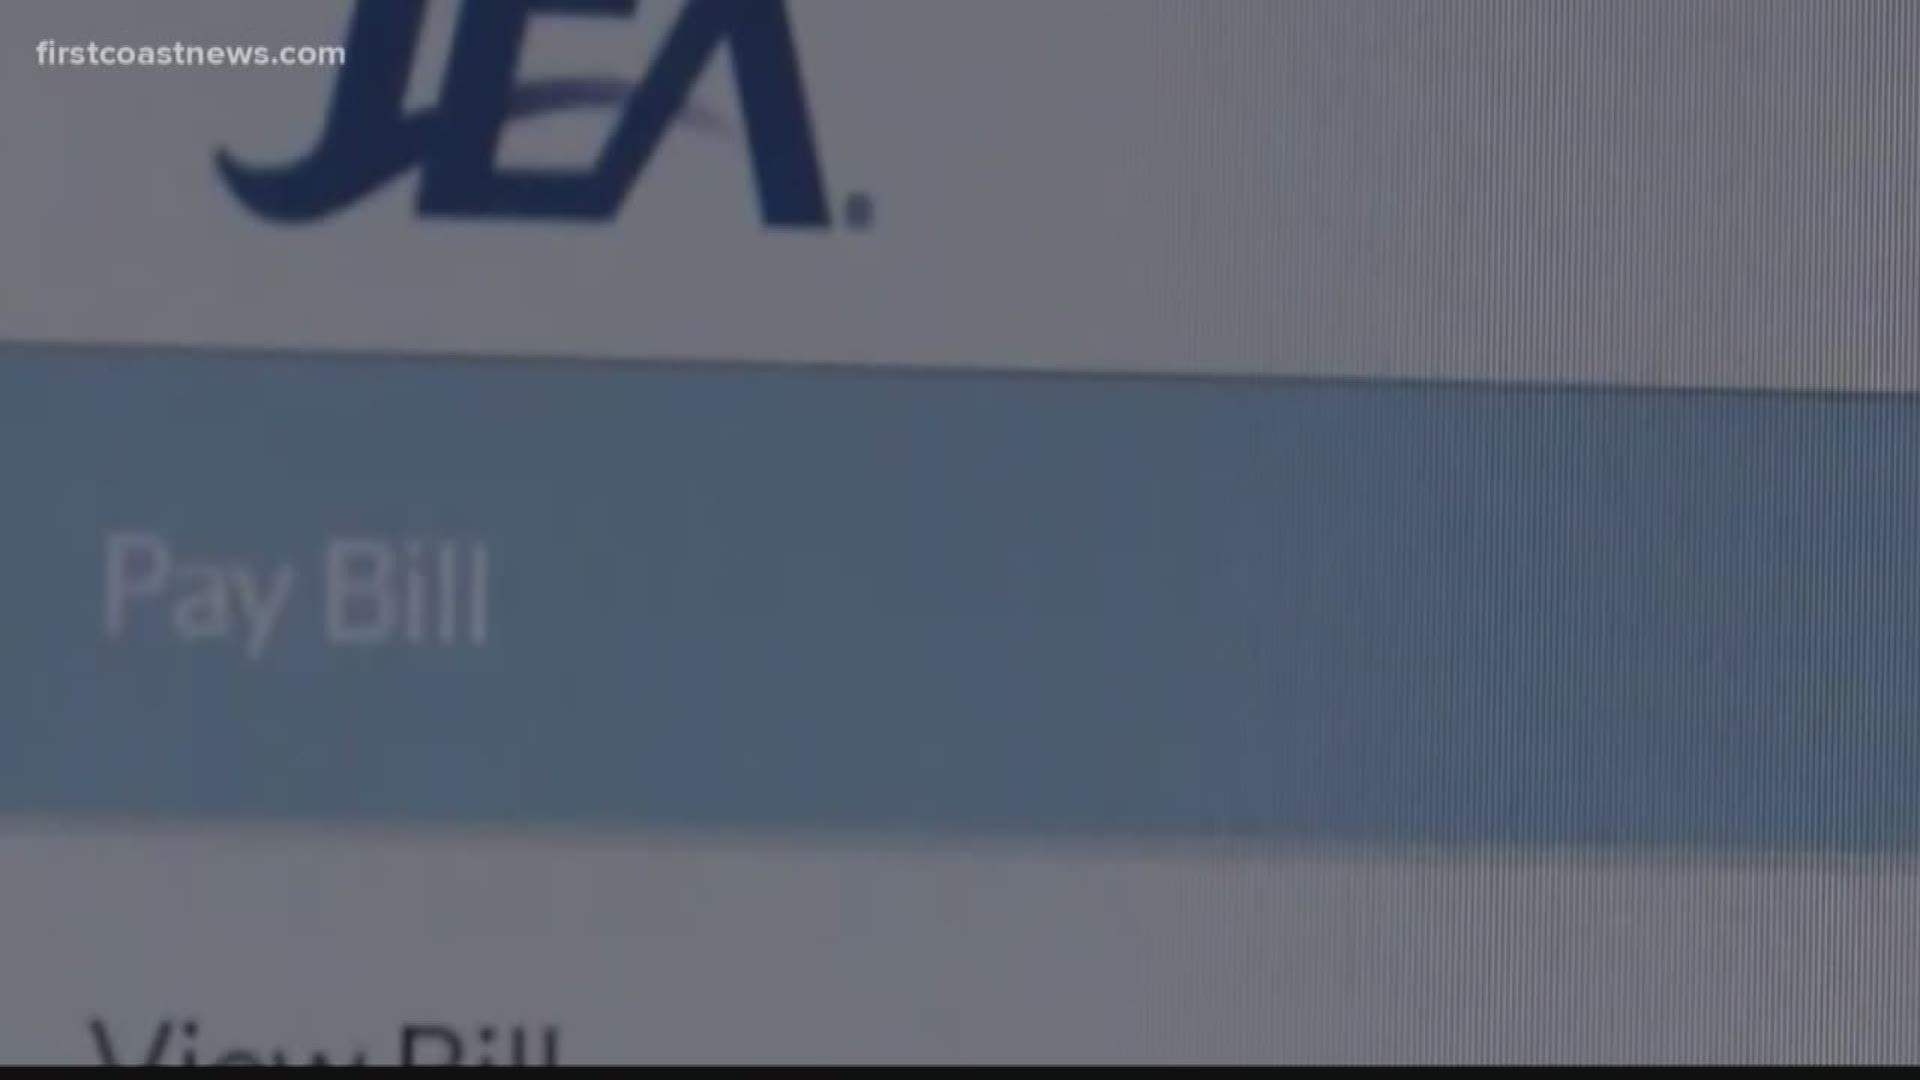 JEA has recently sent out email warning customers of a spike in phone scams. They say the most important thing a customer can do is record the scammer's number and n